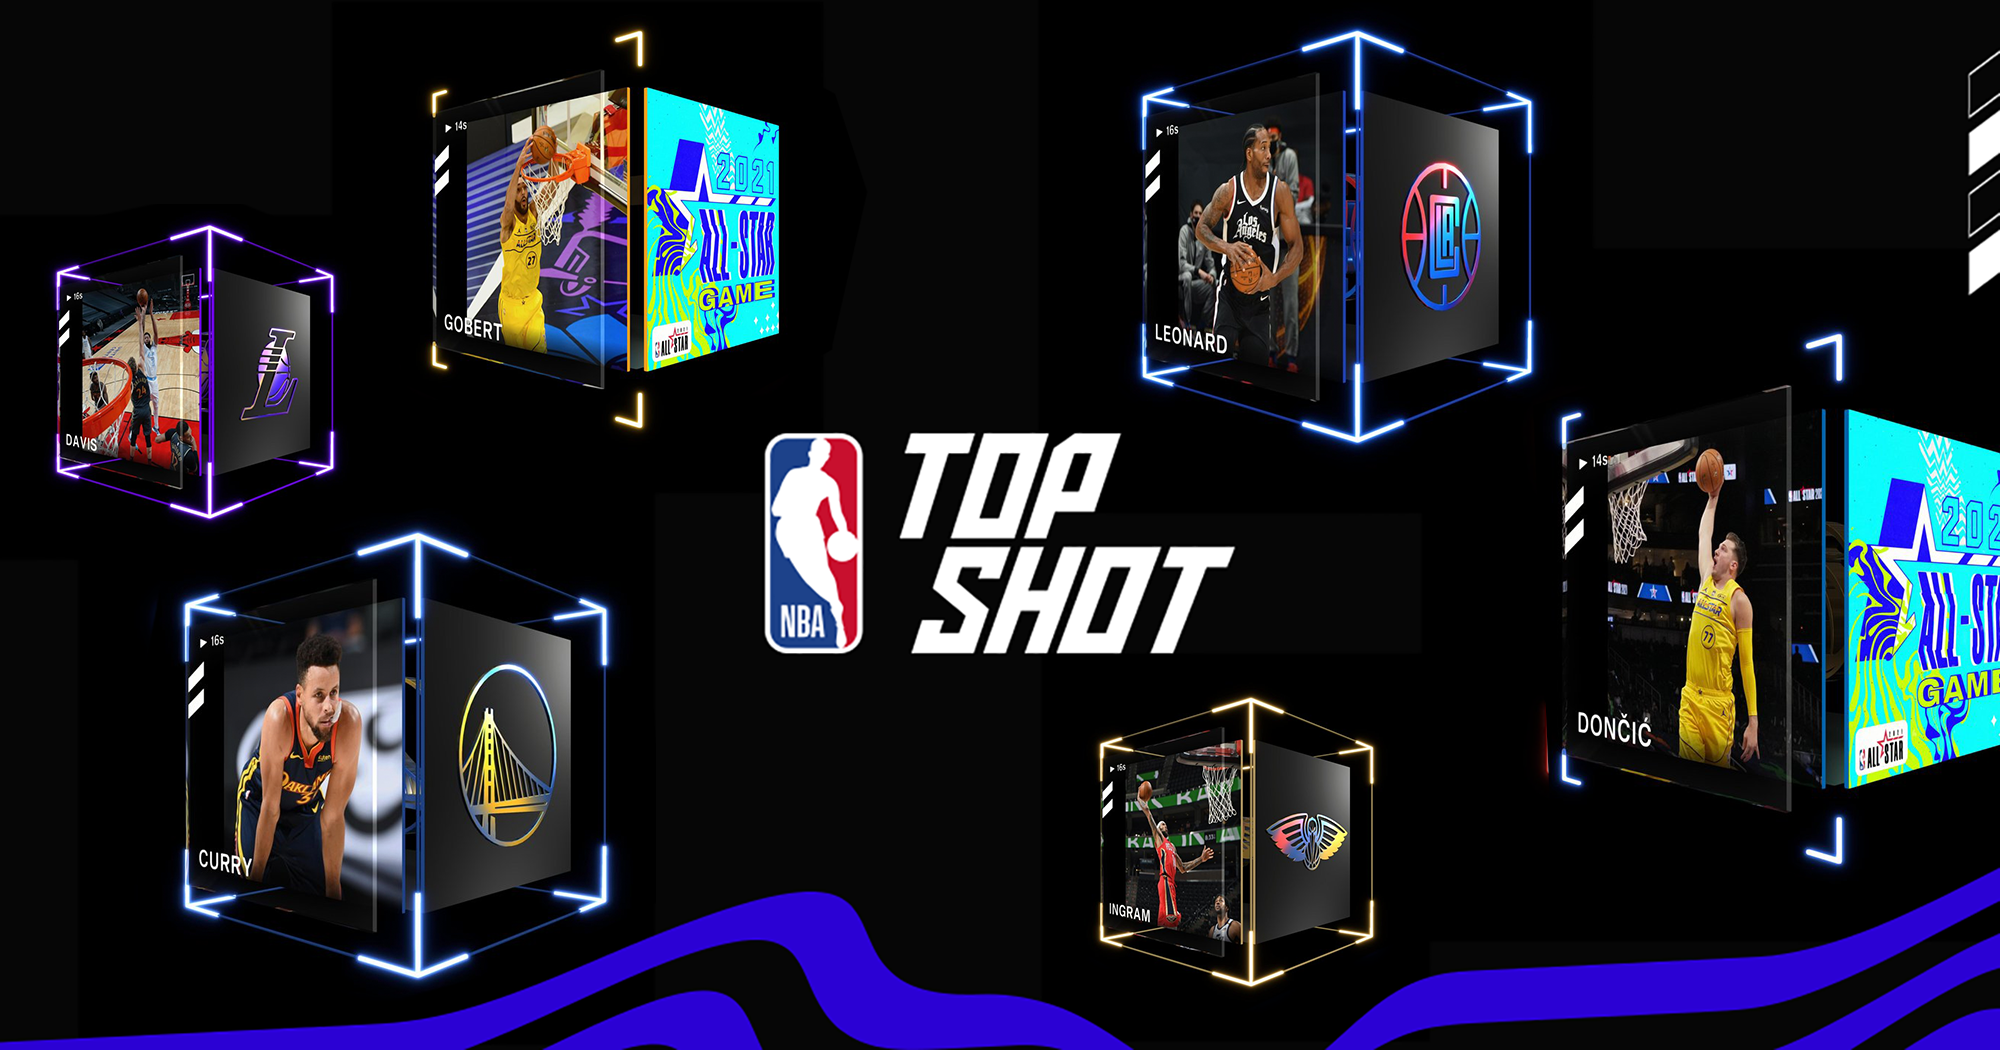 Already a marketing draw, Luka Doncic is poised to dominate NBA Top Shot as  NFTs become more mainstream